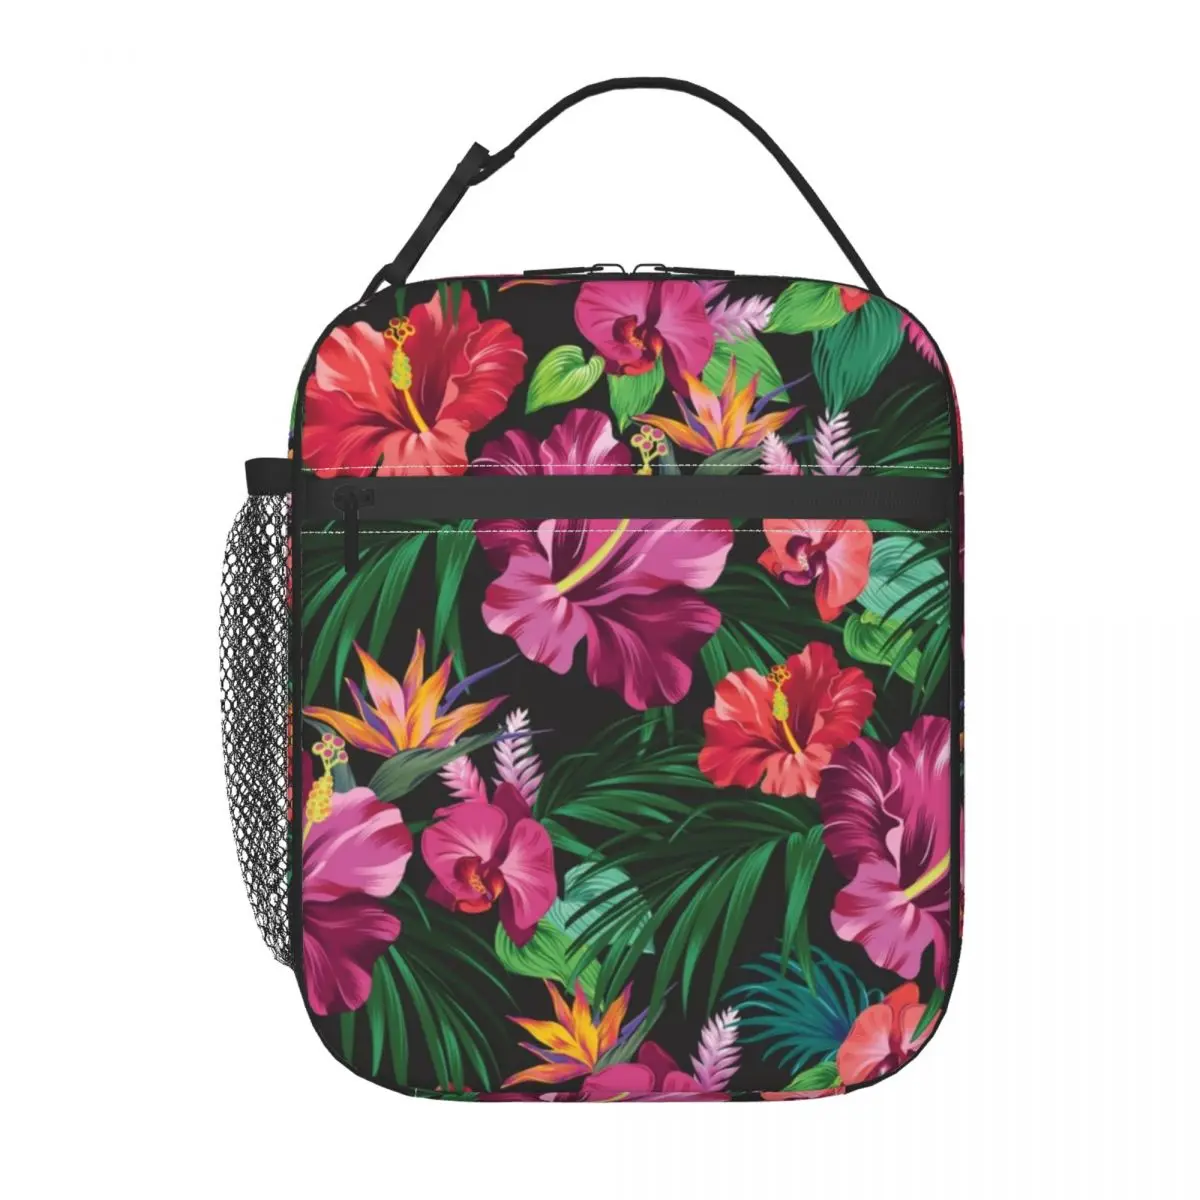 

Juicy Tropical Lunch Bag with Handle Floral Leaves Print Office Mesh Pocket Cooler Bag Zipper Pearl Cotton Beautiful Thermal Bag